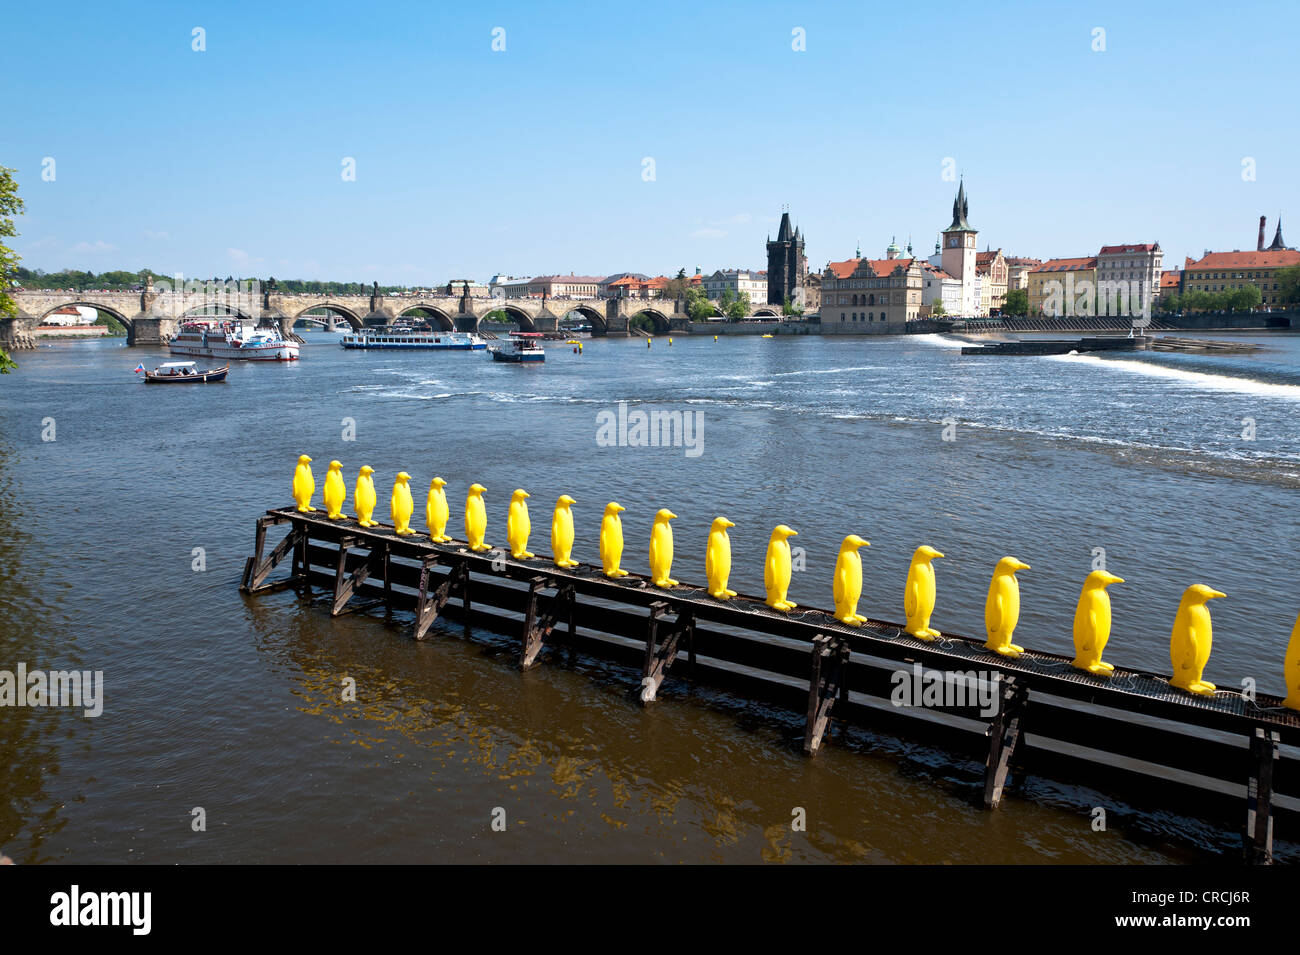 34 yellow penguins, installation by the Italian group of artists, Cracking Art Group, on the Vltava River, Muzeum Kampa, ue Stock Photo